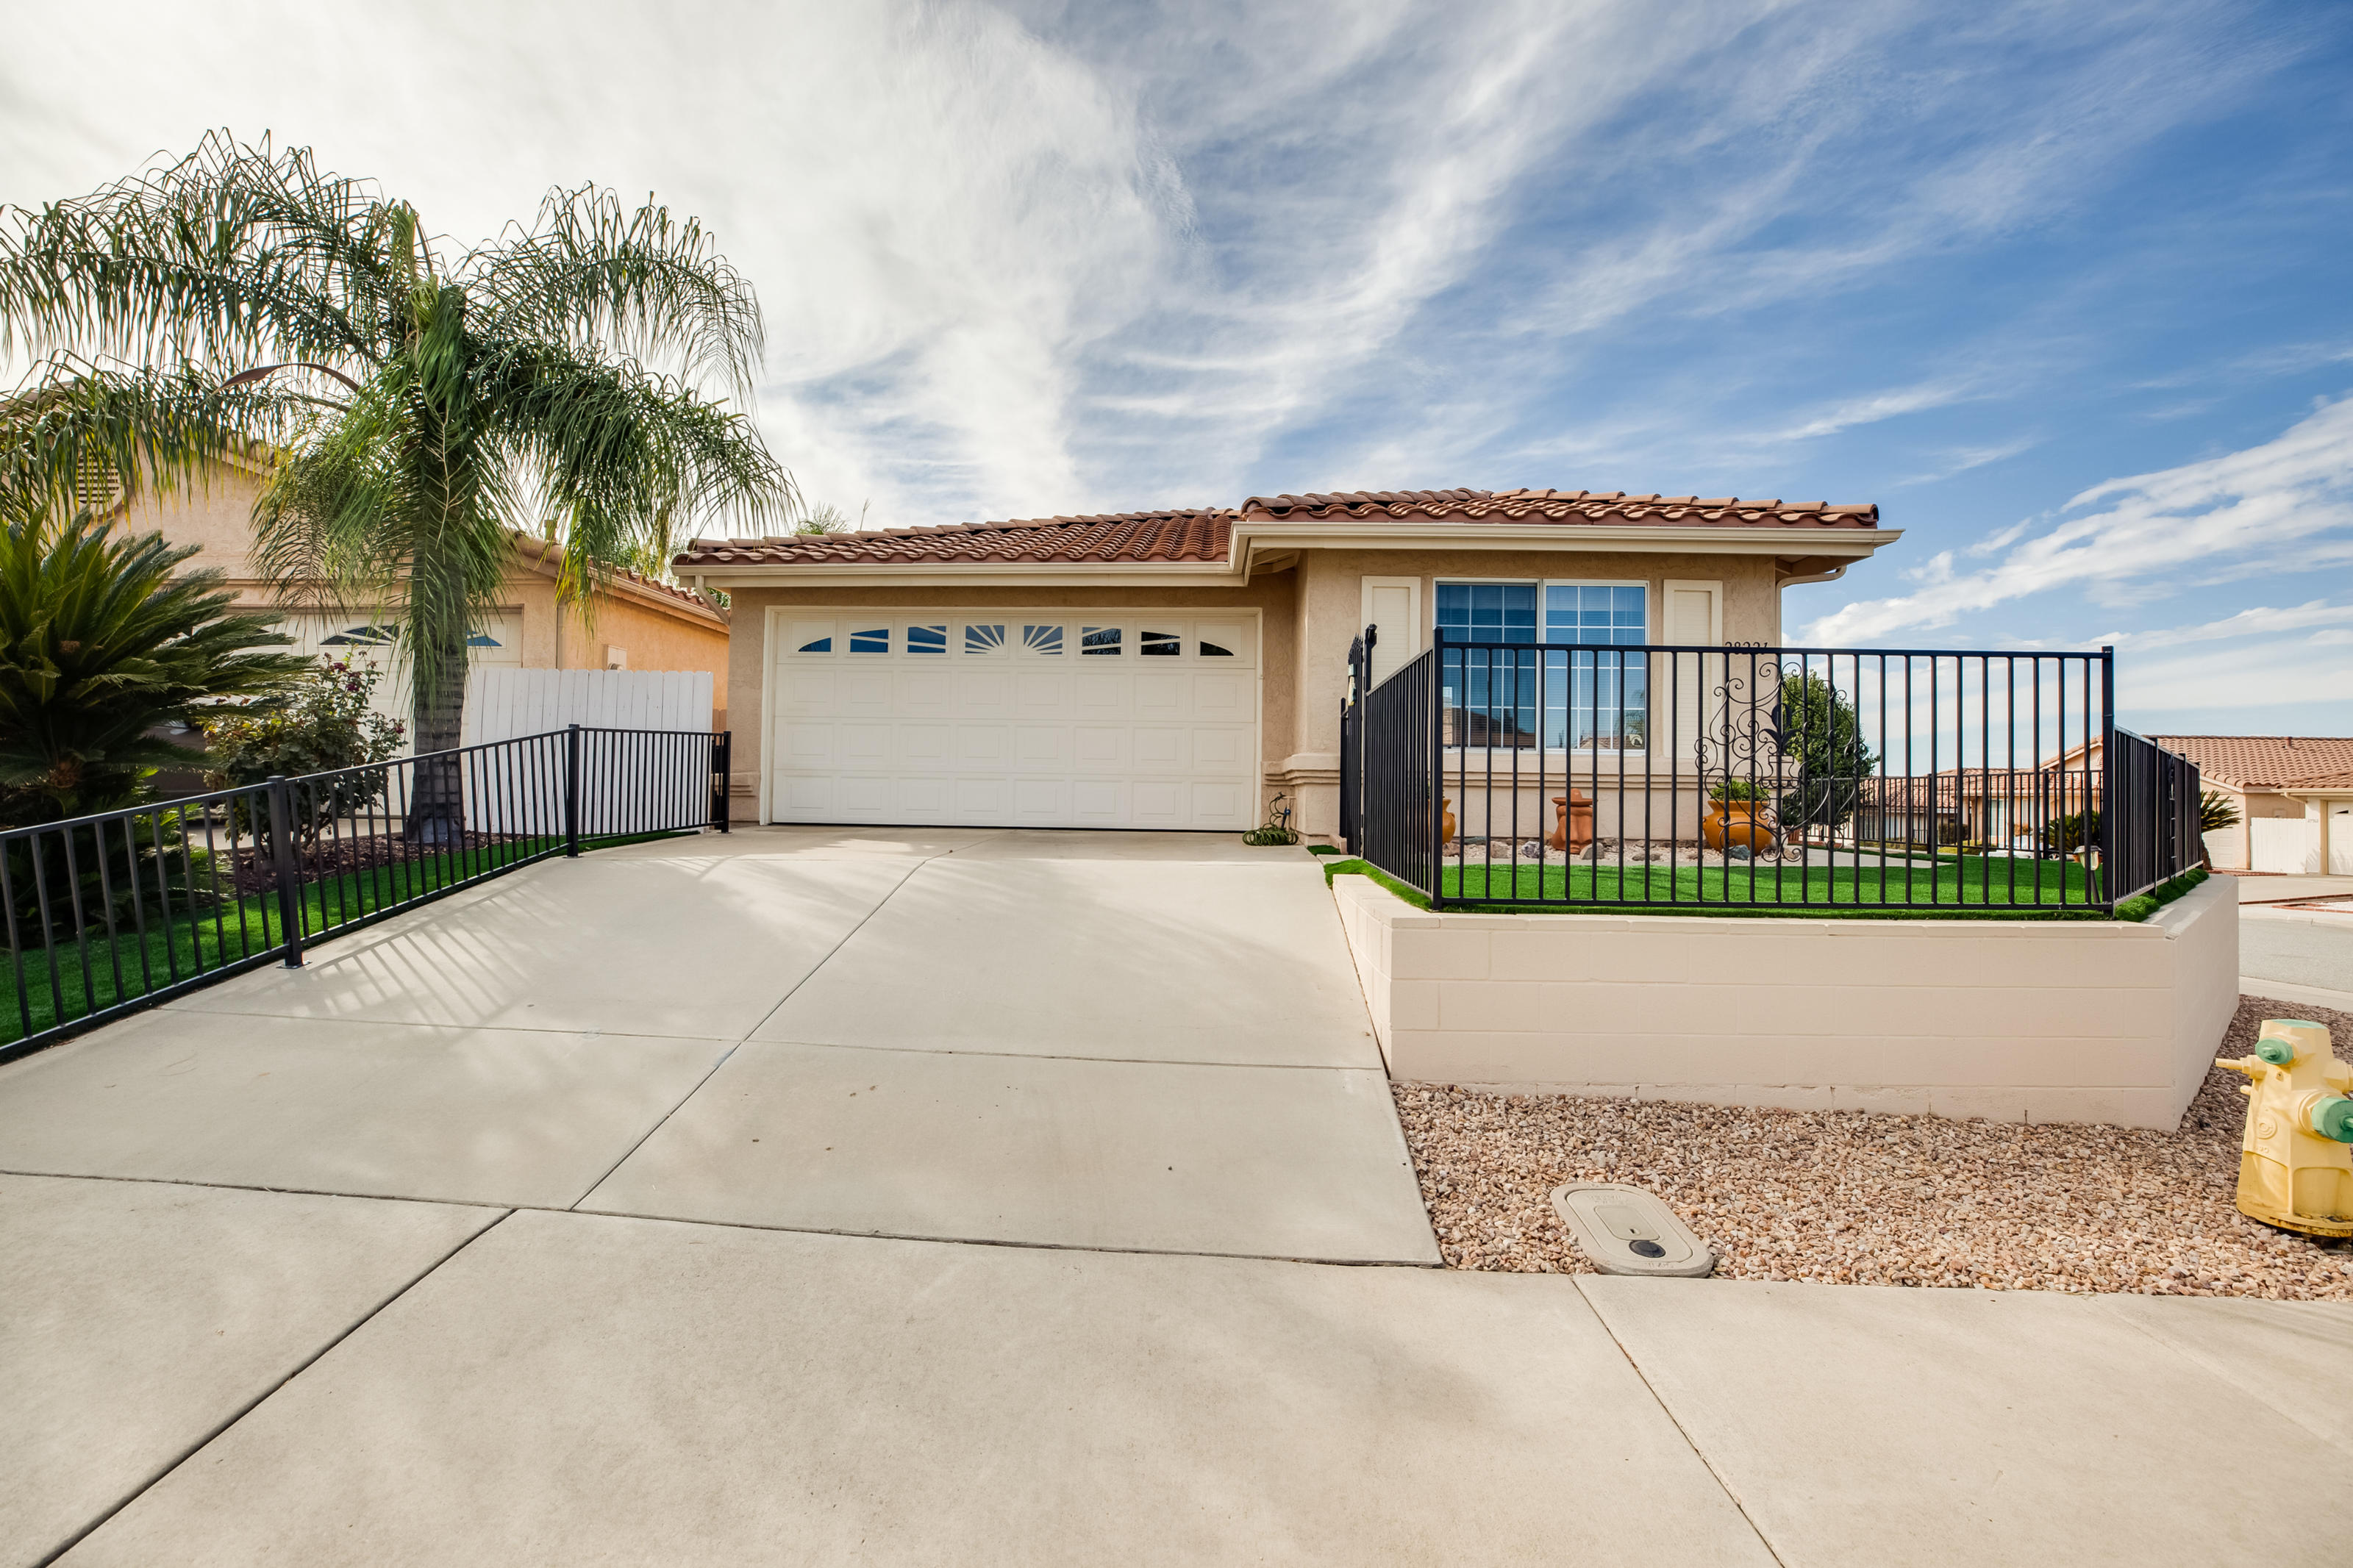 Listed and Sold same day in 55+ CasaBlanca Villas in Menifee, CA. If you are thinking of Buying, or Selling Call Denise Gentile 951-751-1311 for professional results!